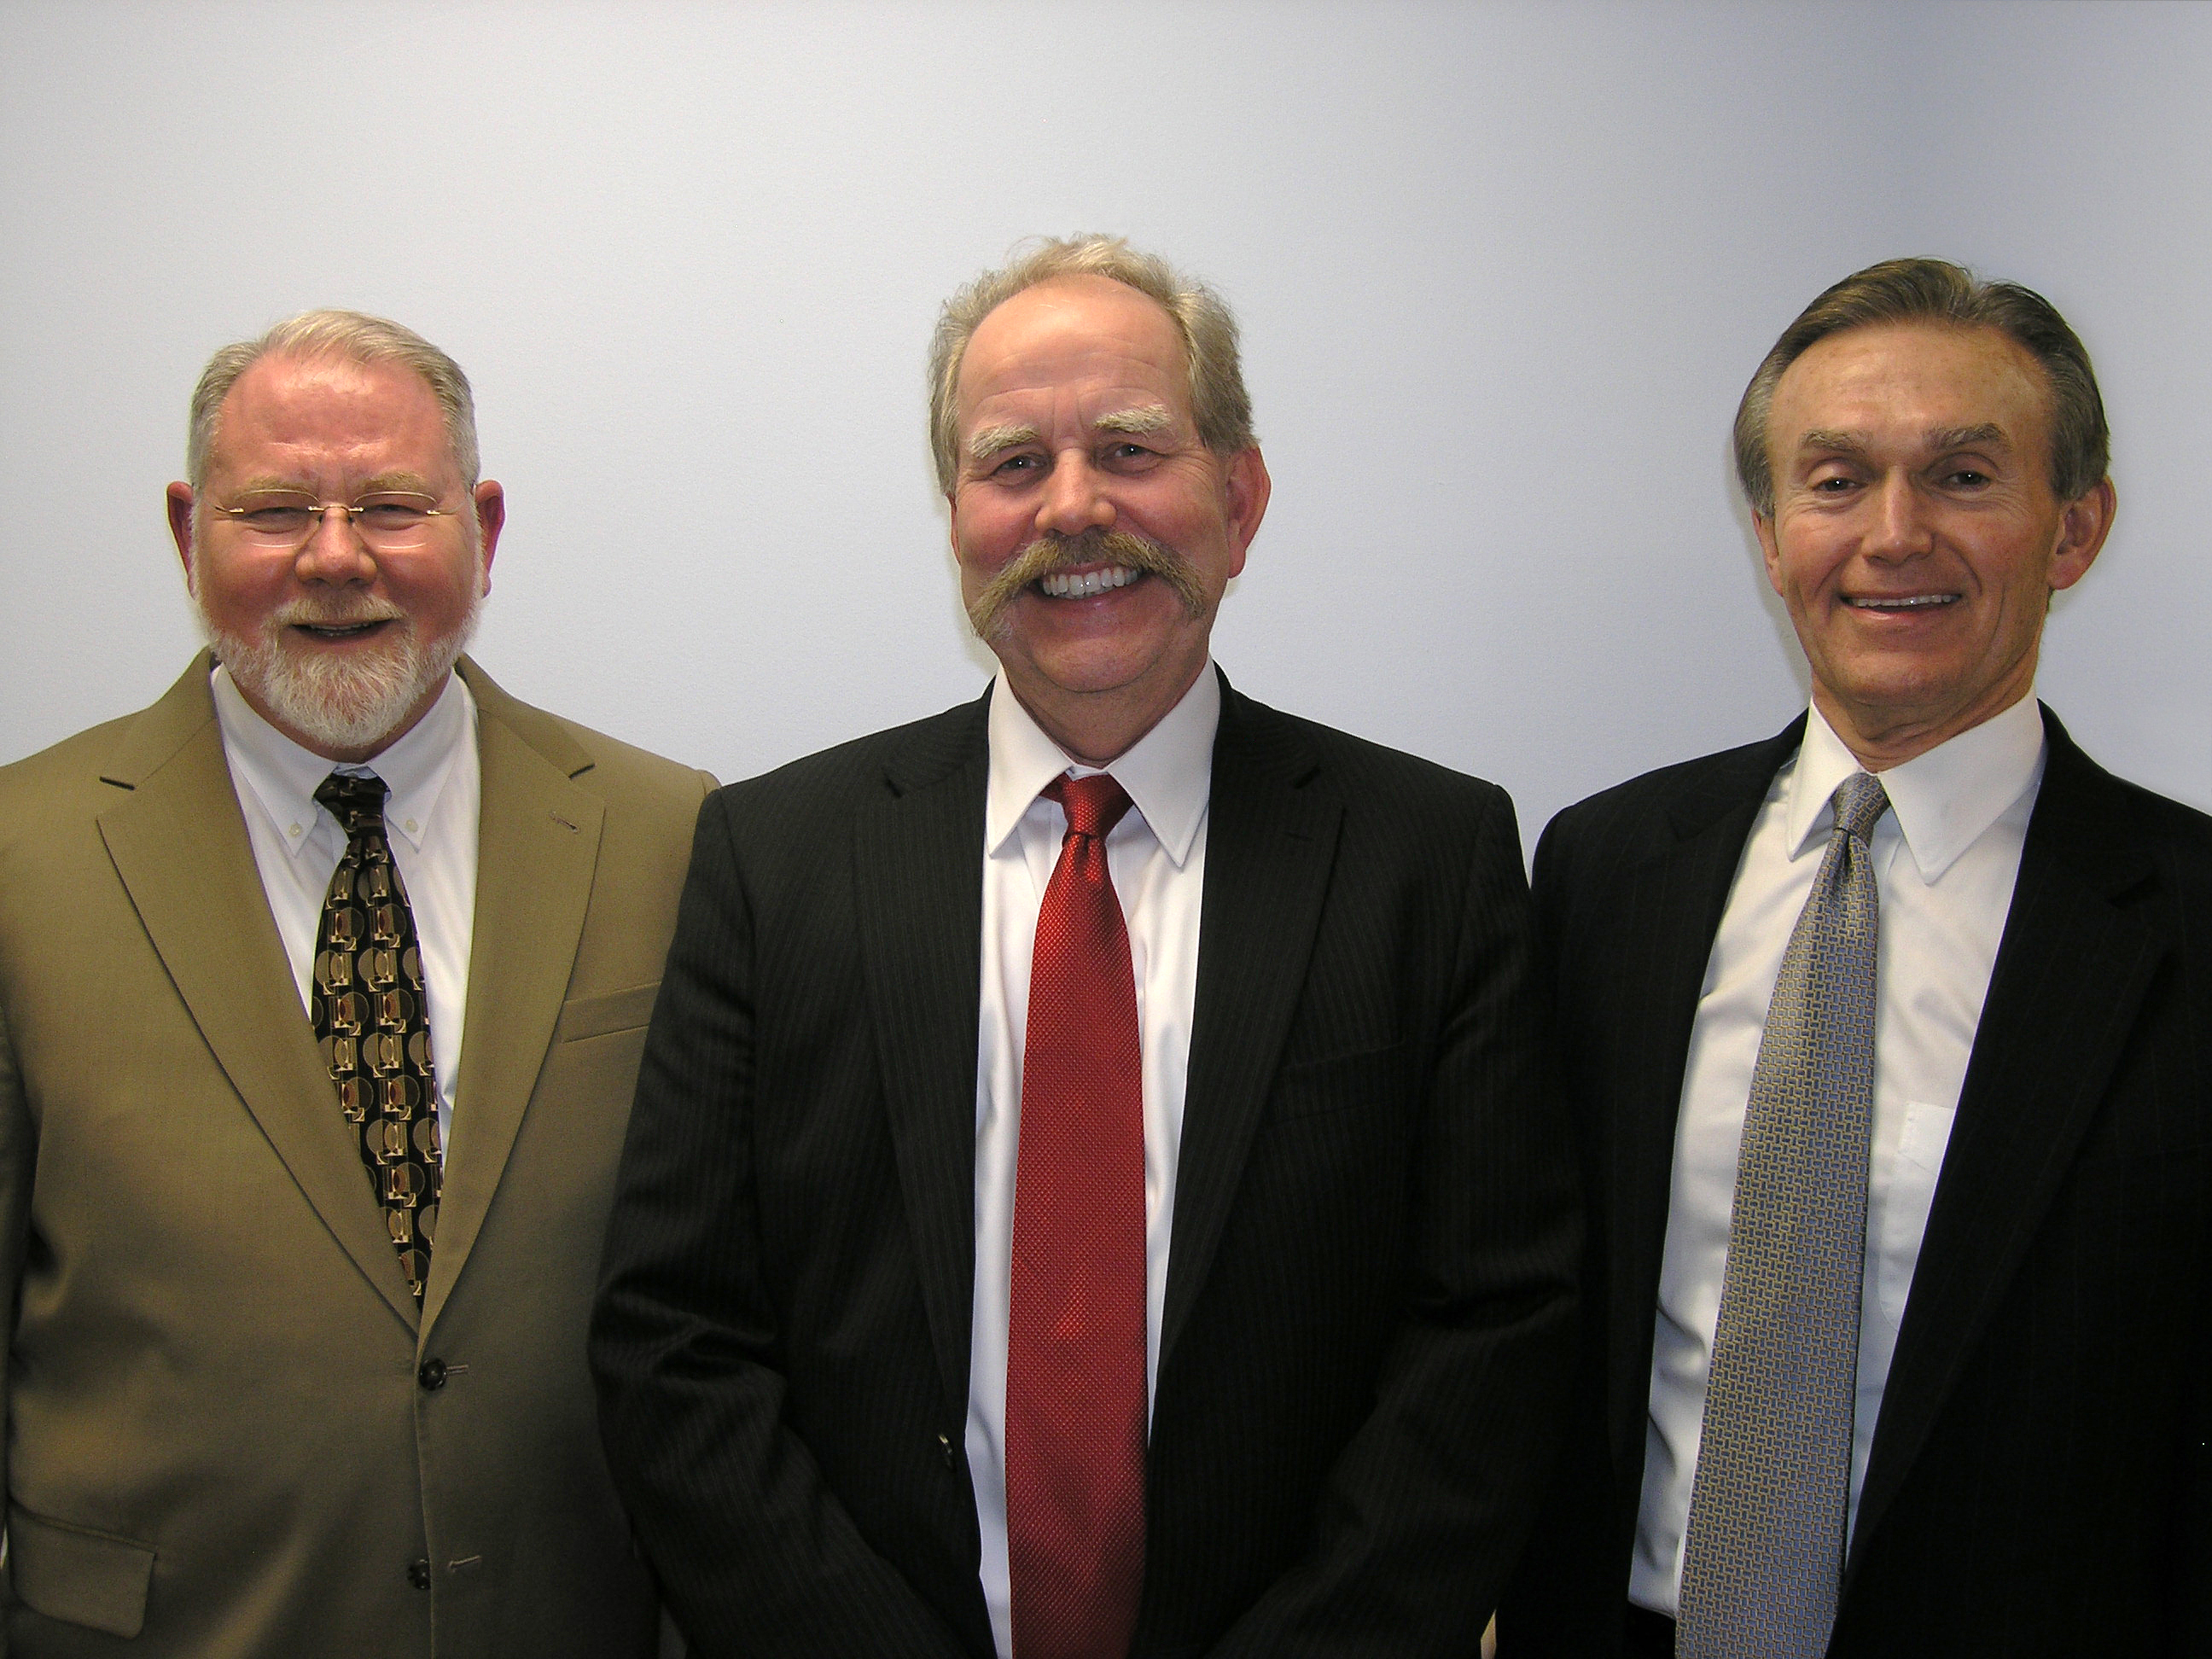 Bob Jones, Ph.D., President & CEO of Children’s Aid and Family Services, Jerrold (Jerry) Binney and Bruce Brady, Chair, Board of Trustees, Children’s Aid and Family Services.